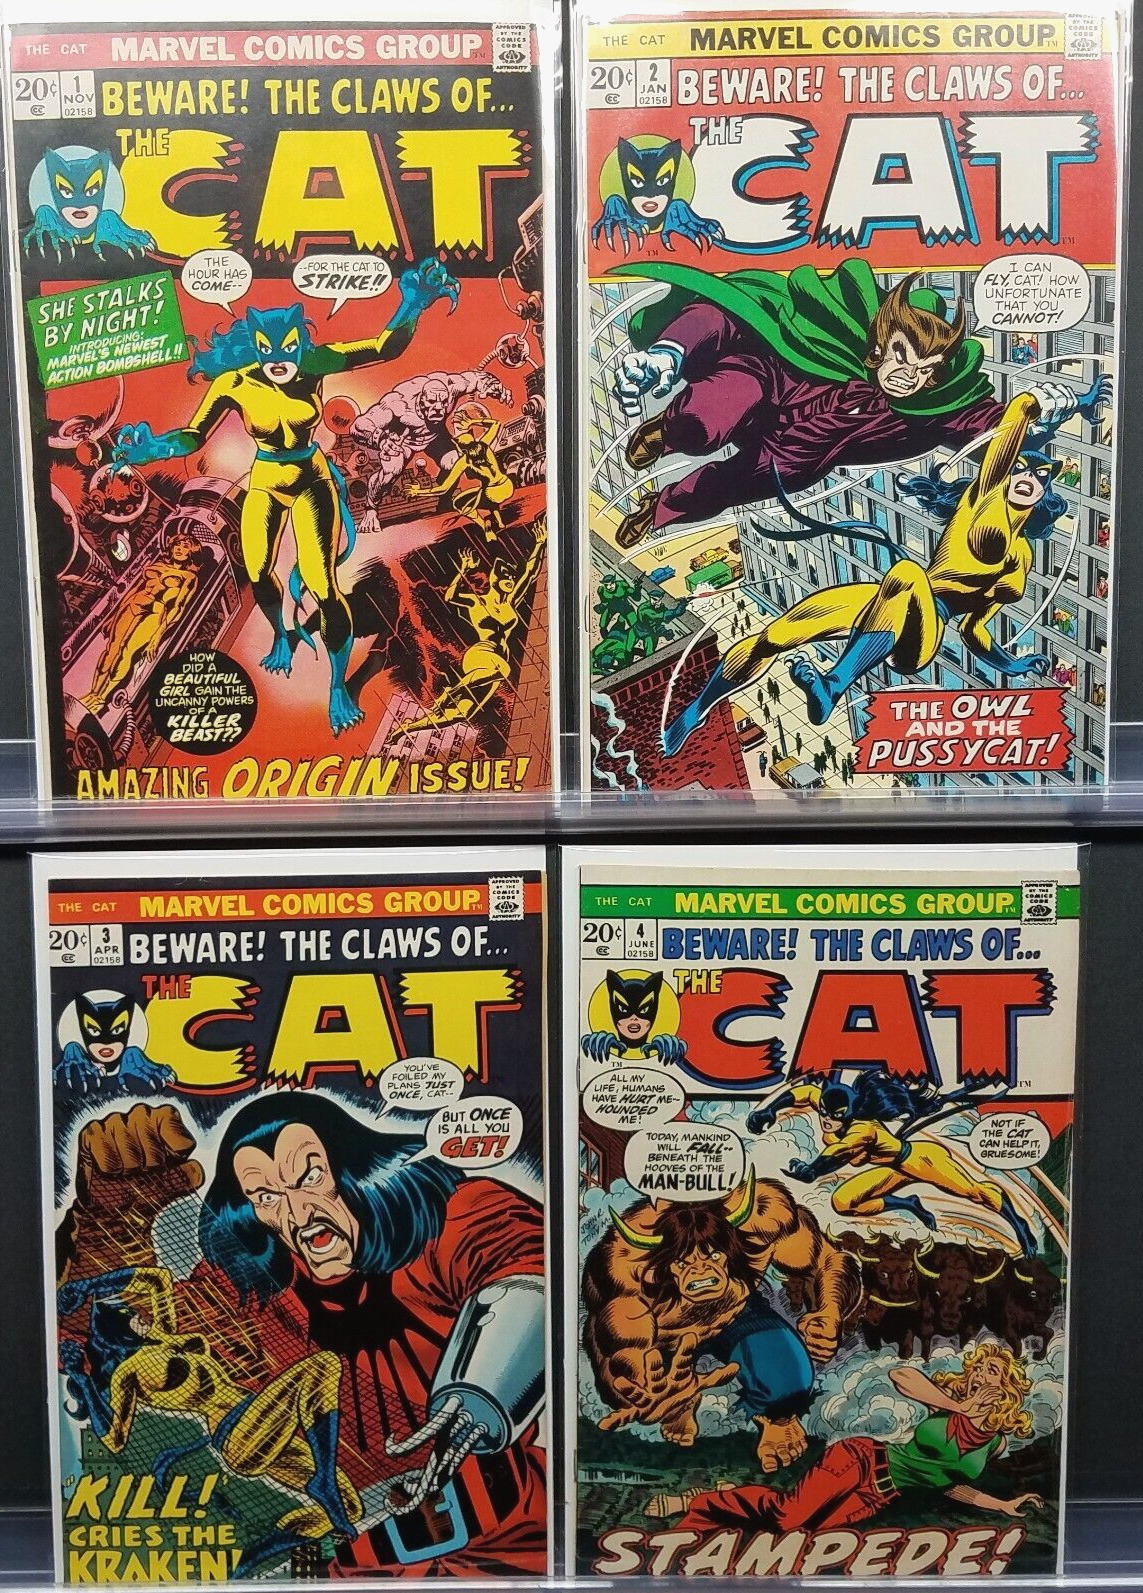 BEWARE THE CLAWS OF.. THE CAT #1 2 3 4 1-4 MARVEL 1972 TIGRA GREER GRANT HIGHER